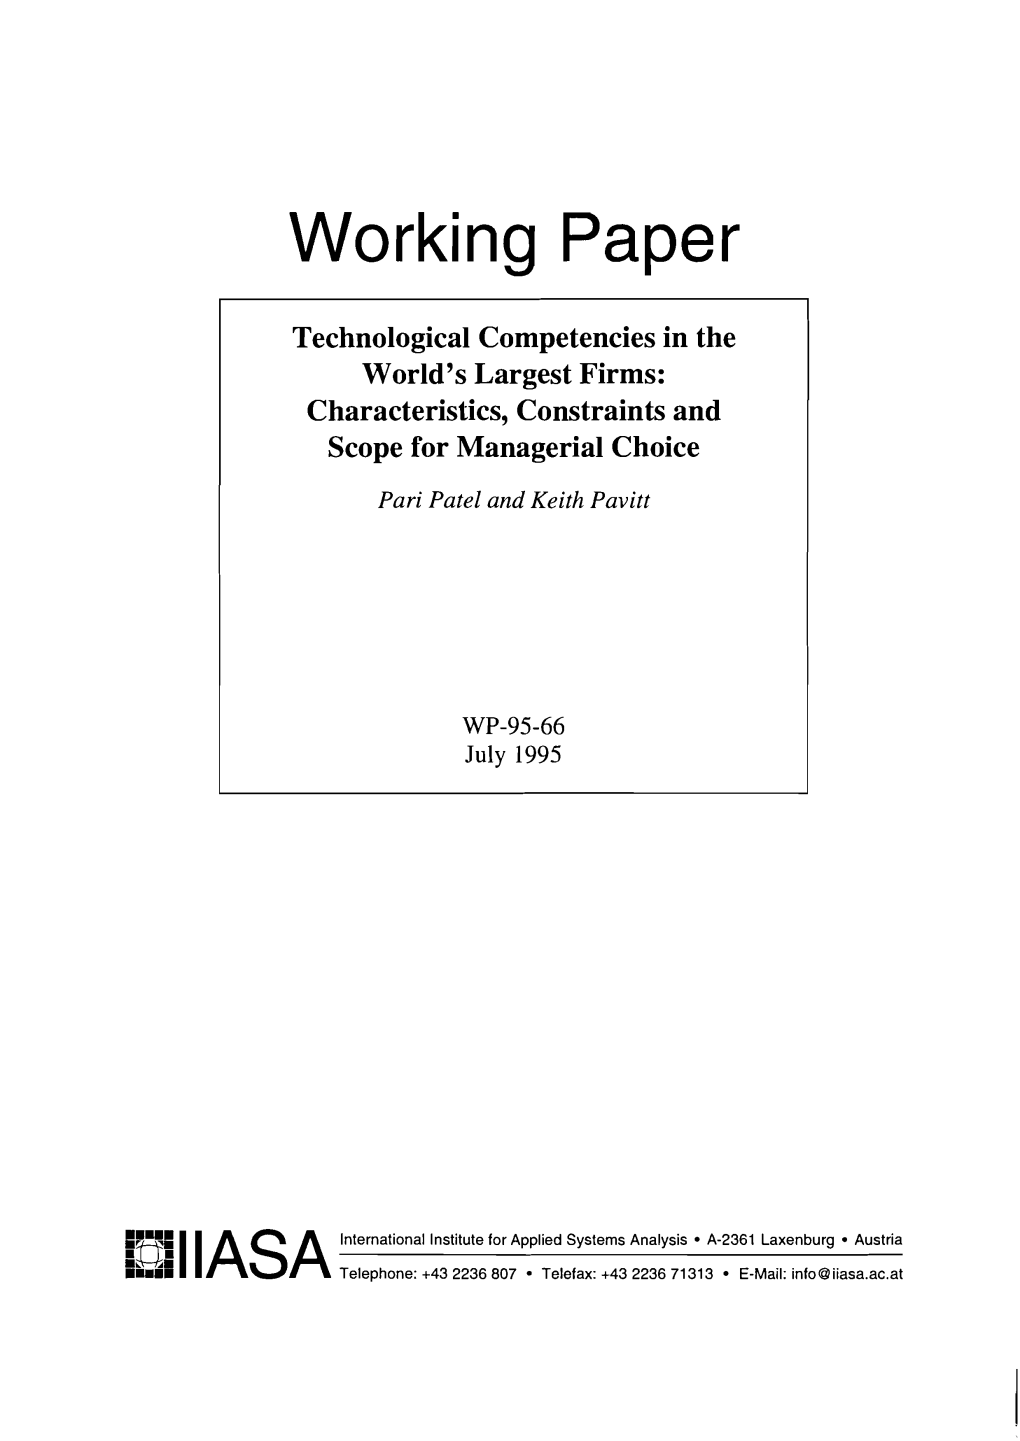 Technological Competencies in the World's Largest Firms: Characteristics, Constraints and Scope for Managerial Choice Pari Patel and Keith Pavitt